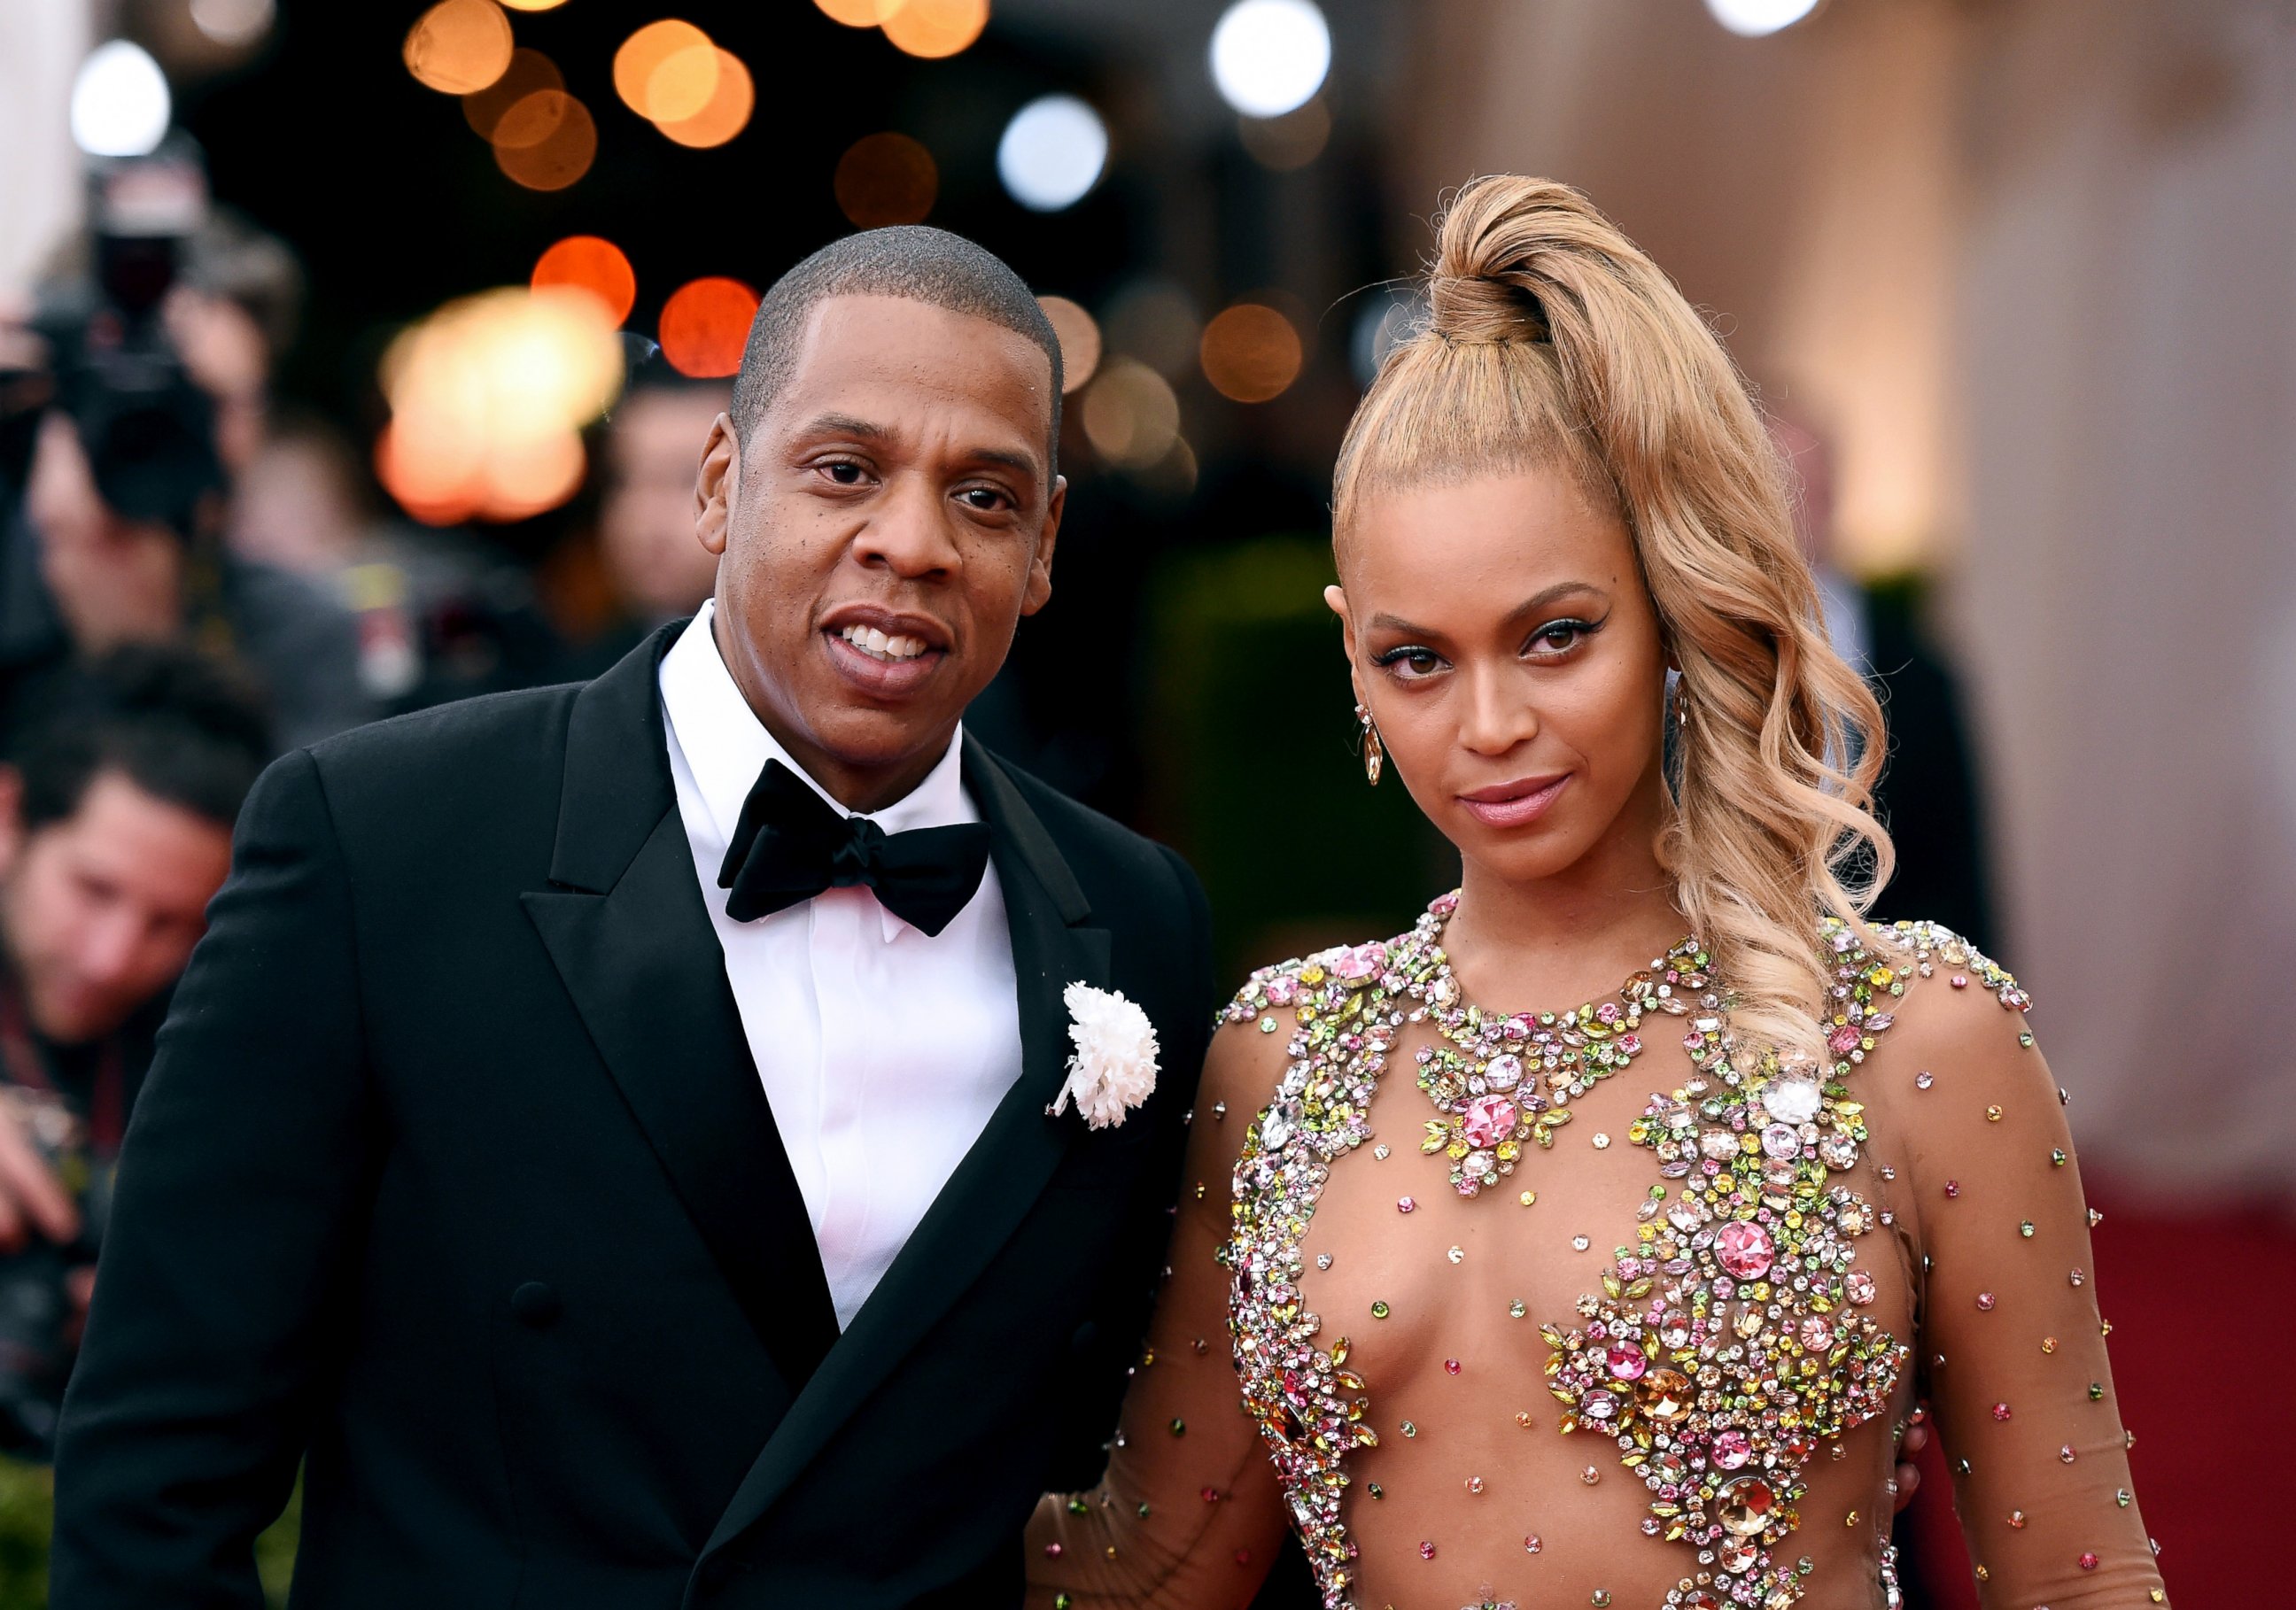 PHOTO: Jay-Z and Beyonce attend the "China: Through The Looking Glass" Costume Institute Benefit Gala at the Metropolitan Museum of Art, May 4, 2015, in New York City.